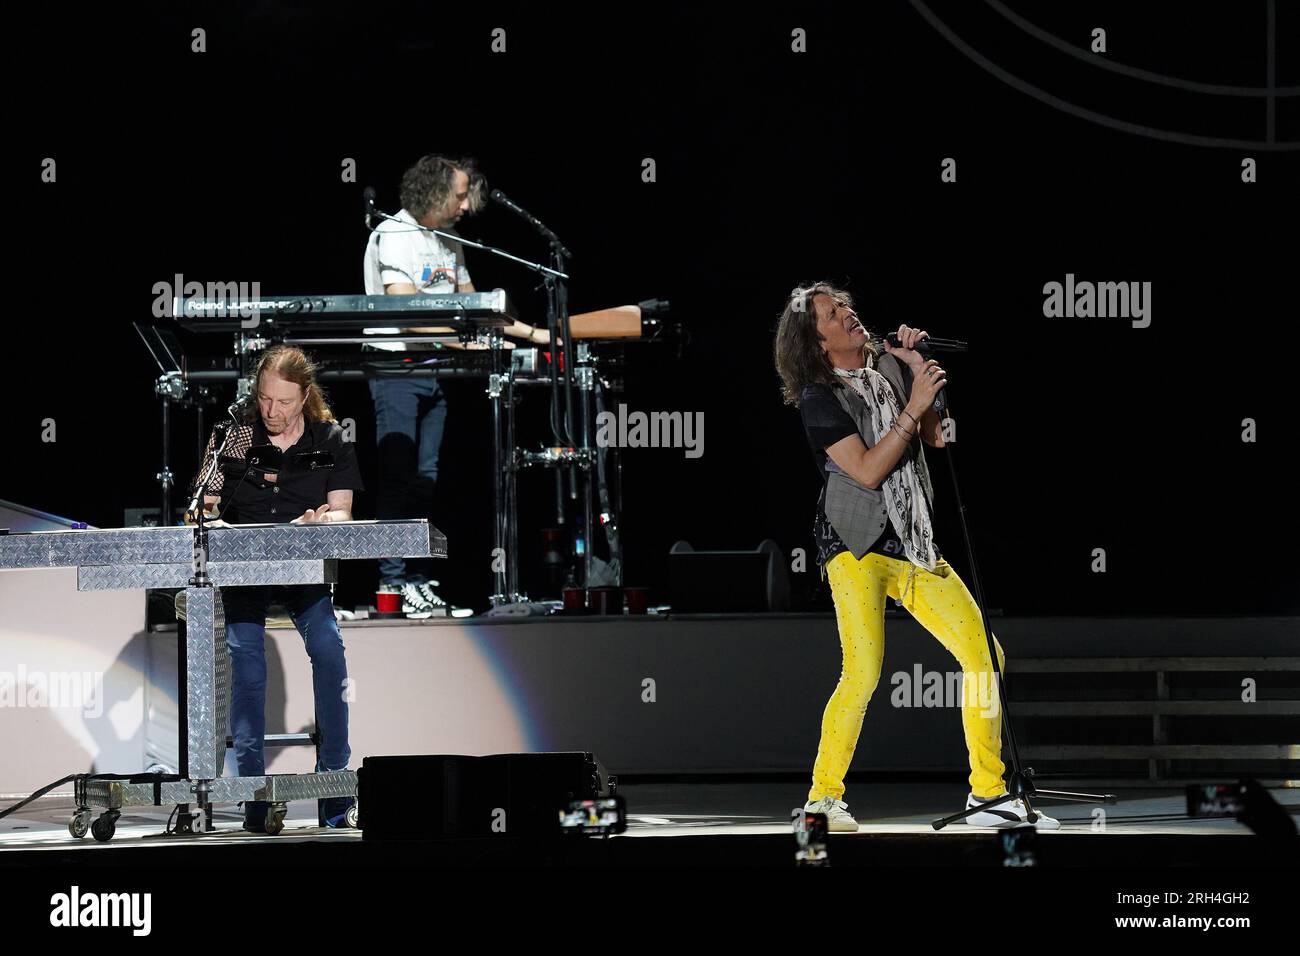 Dallas, United States. 11th Aug, 2023. August 11, 2023, Dallas, Texas, United States: Kelly Hansen, Member of the American rock band Foreigner performs on stage as part of their The Historic Farewell Tour at the Dos Equis Pavilion on Friday August 11, 2023 in Dallas, Texas, United States. (Photo by Javier Vicencio/Eyepix Group) Credit: Eyepix Group/Alamy Live News Stock Photo